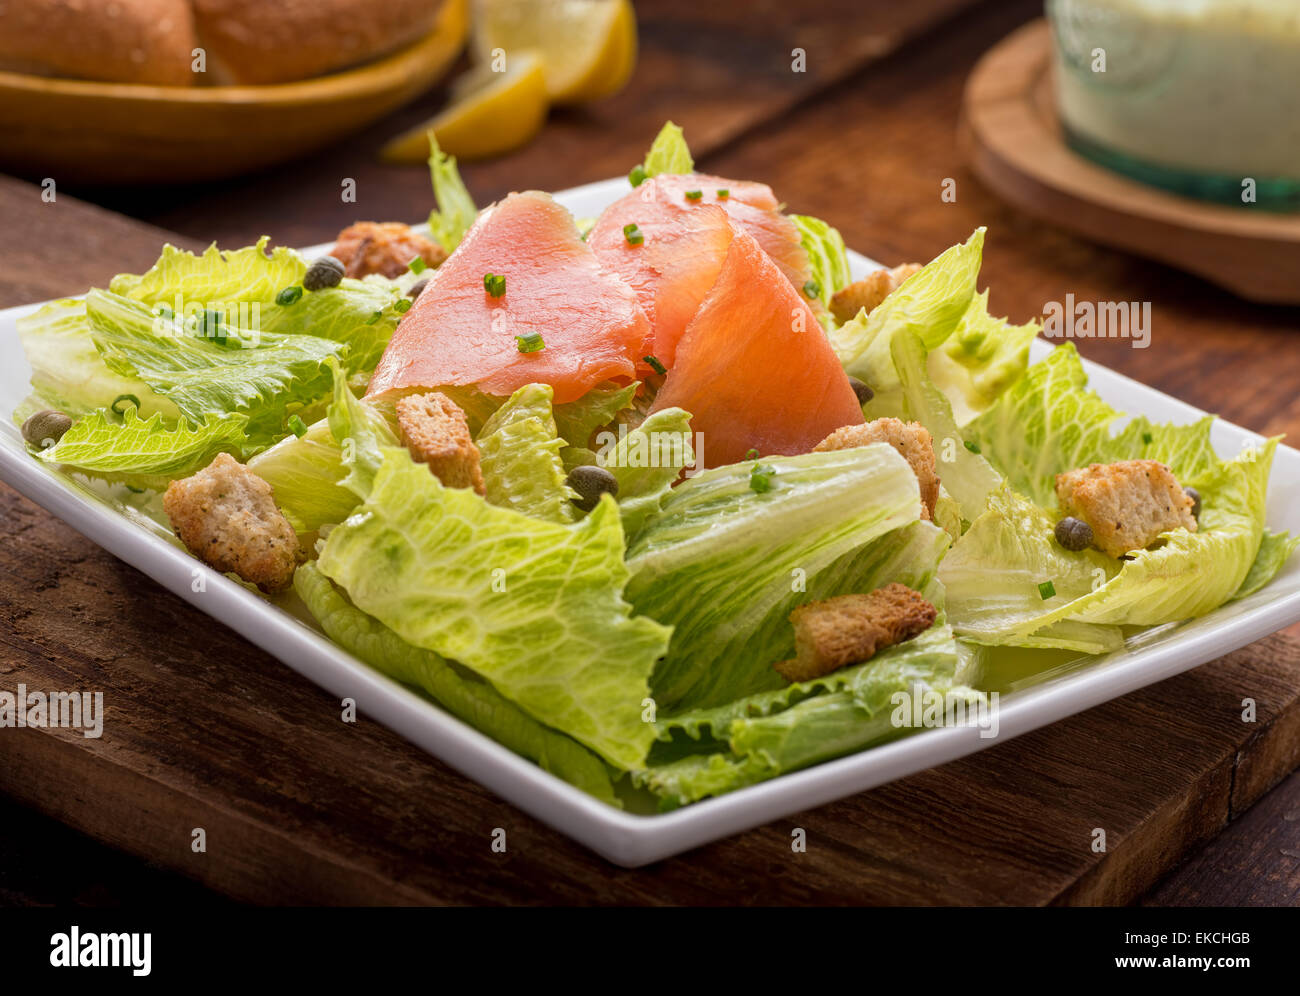 A delicious smoked salmon caesar salad with smoked salmon, croutons, chives, and capers. Stock Photo